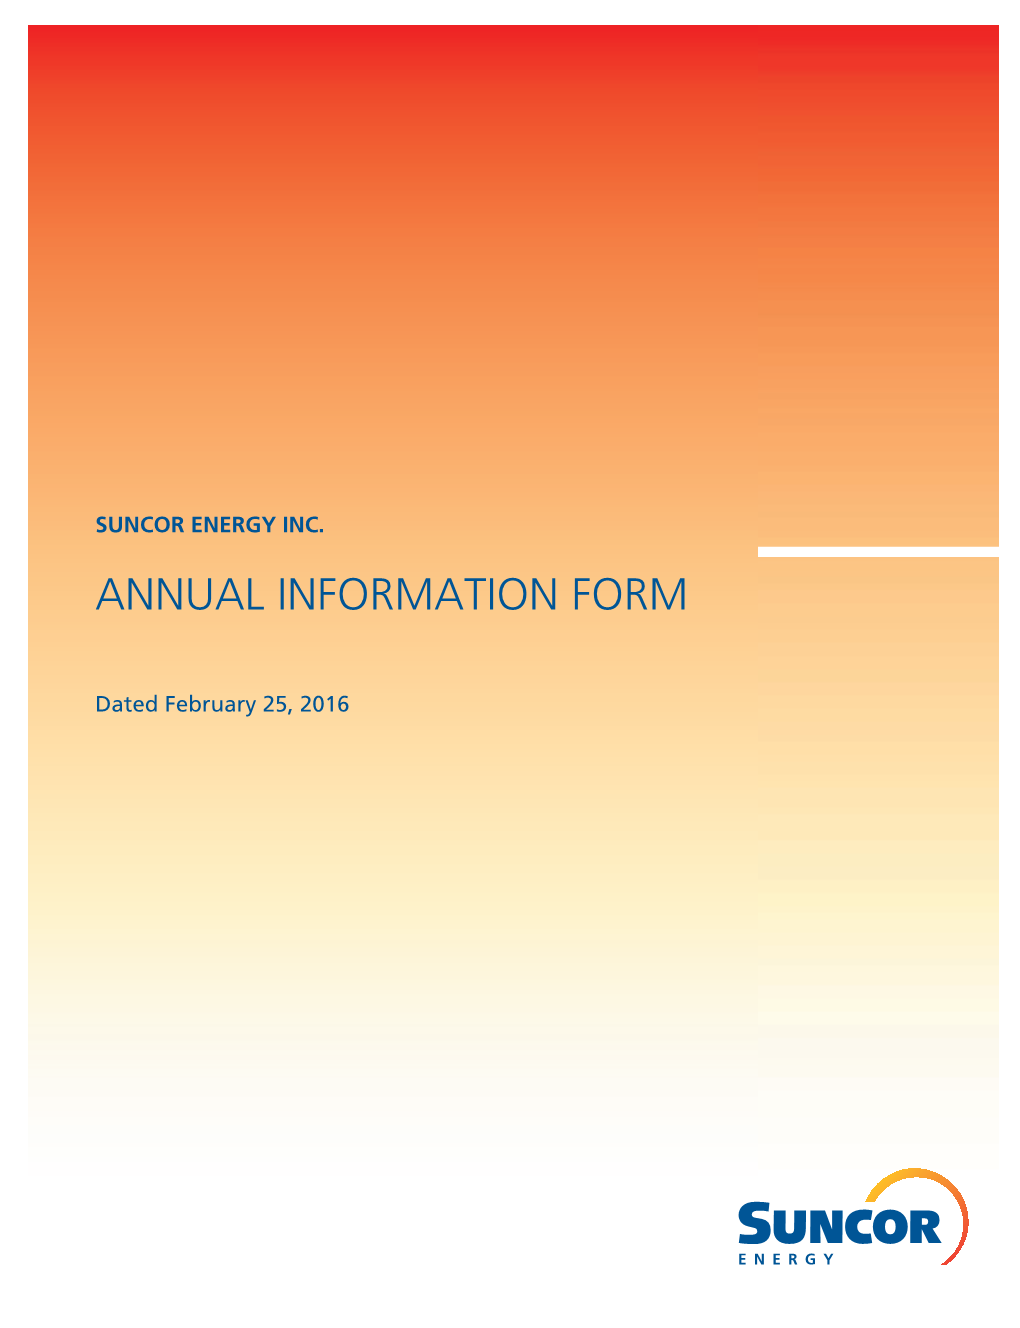 Annual Information Form 2015 1 Glossary of Terms and Abbreviations